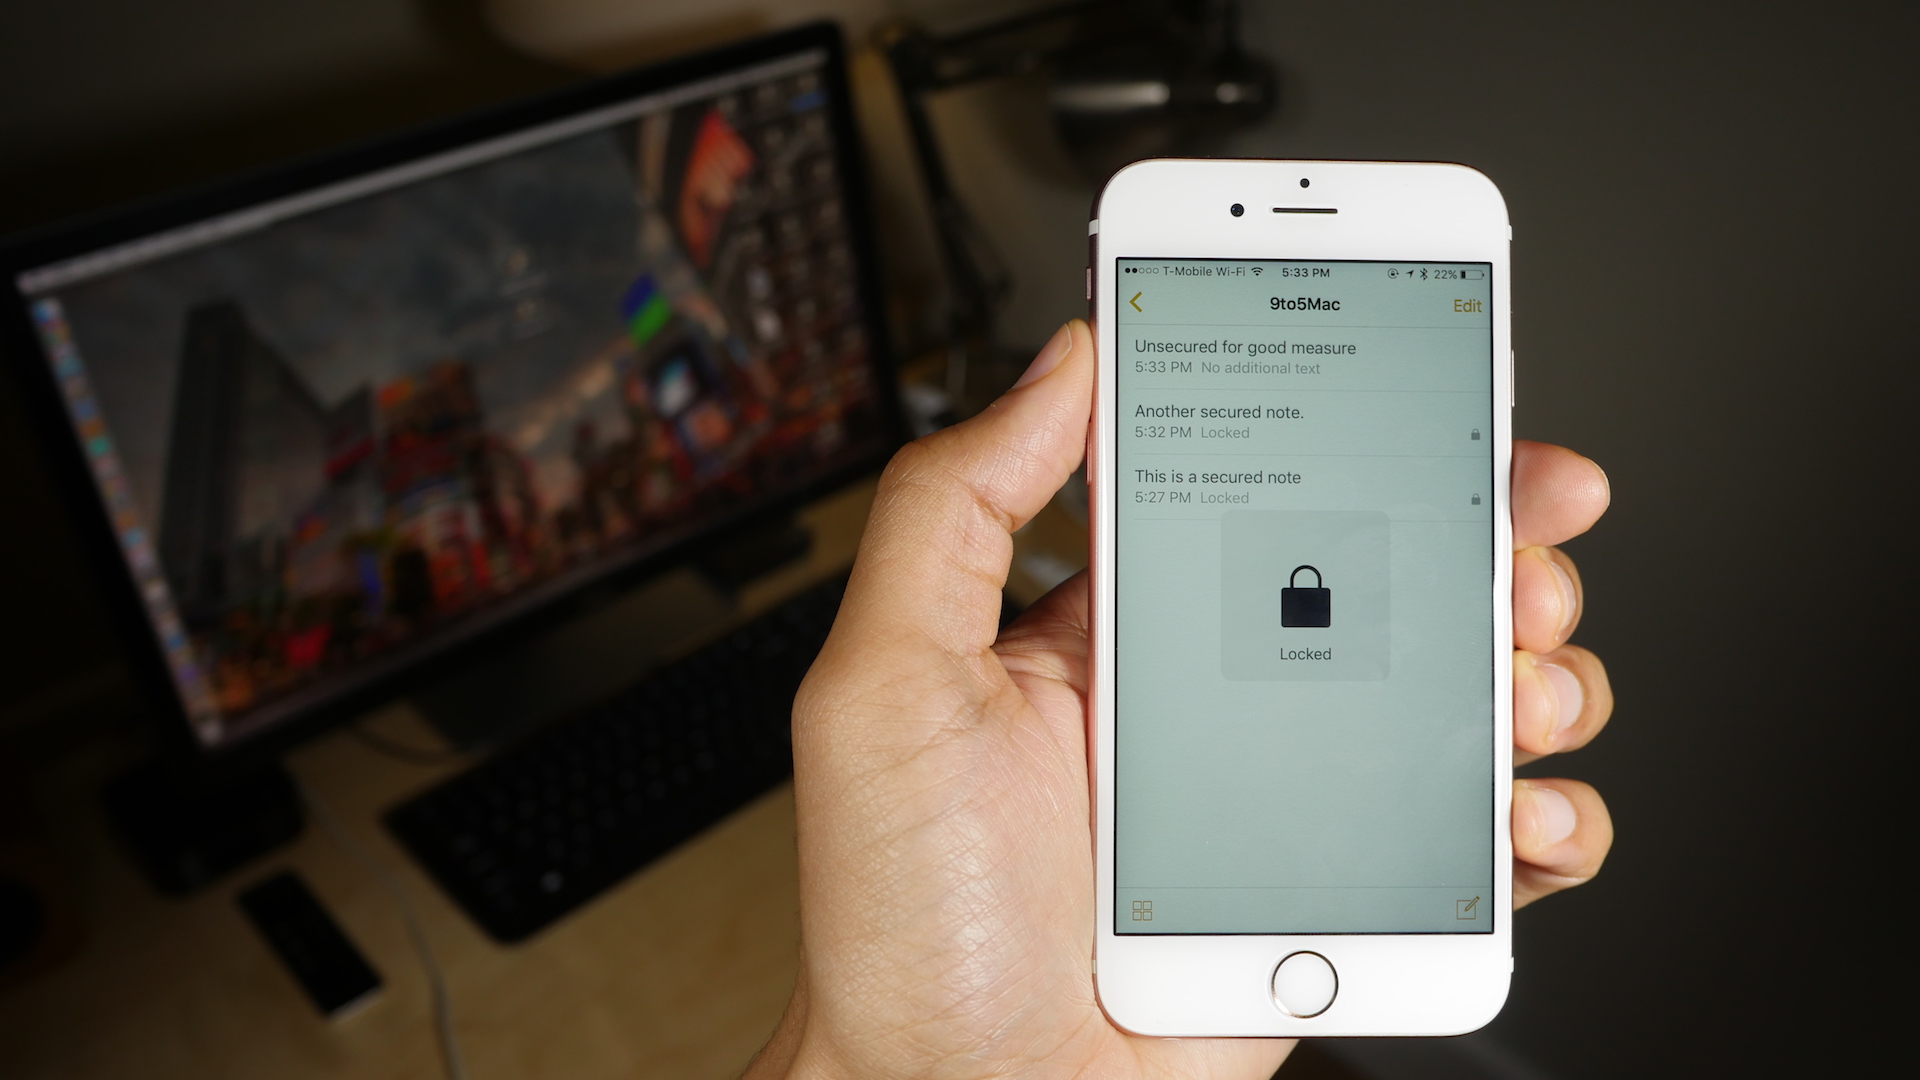 How to secure notes in iOS 9.3